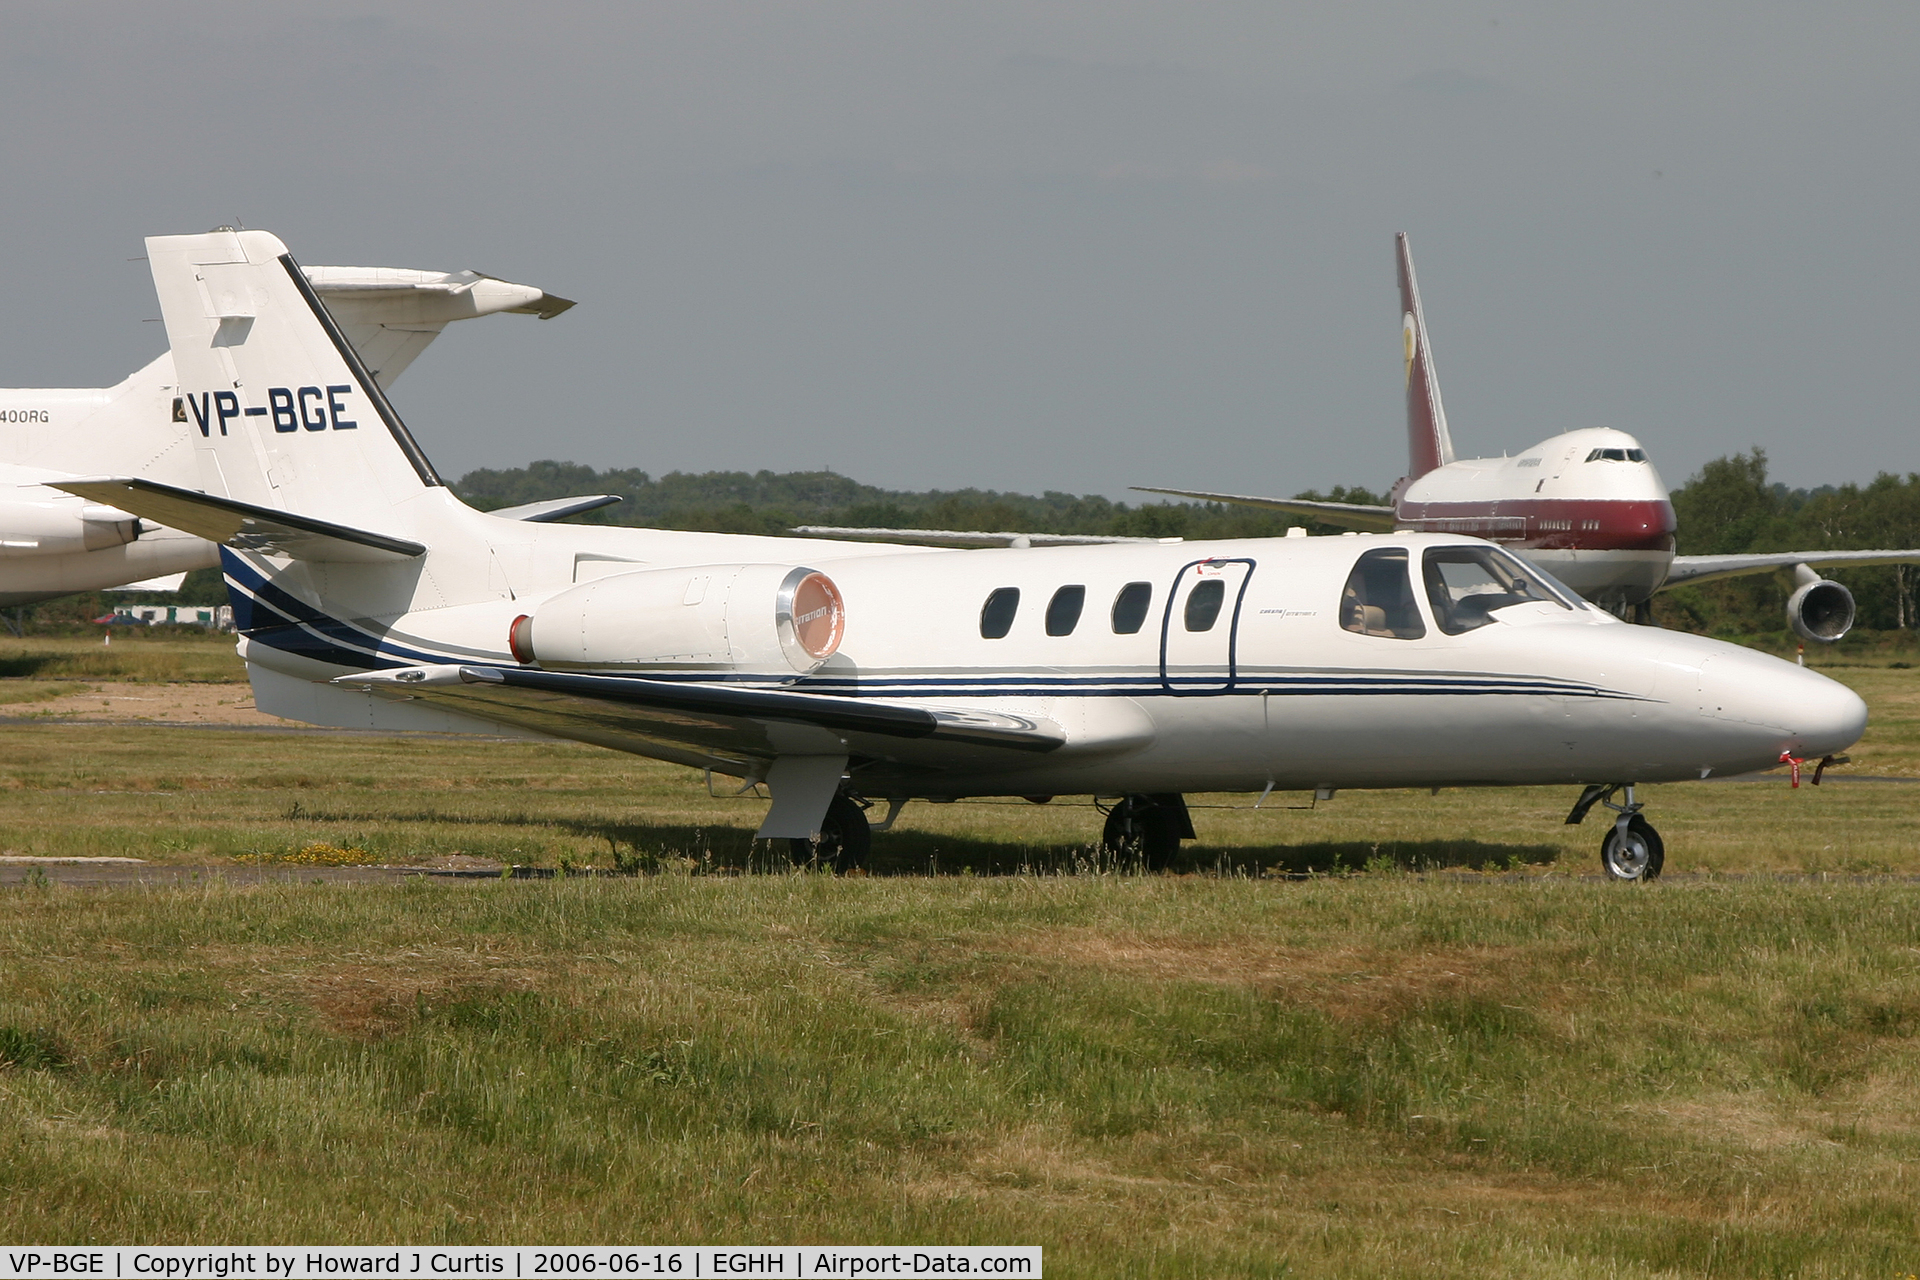 VP-BGE, 1975 Cessna 500 Citation I C/N 500-0287, Corporate.  Crashed into a house at Farnborough, Kent on 30th March 2008 shortly after take-off from Biggin Hill. All on board died. RIP.